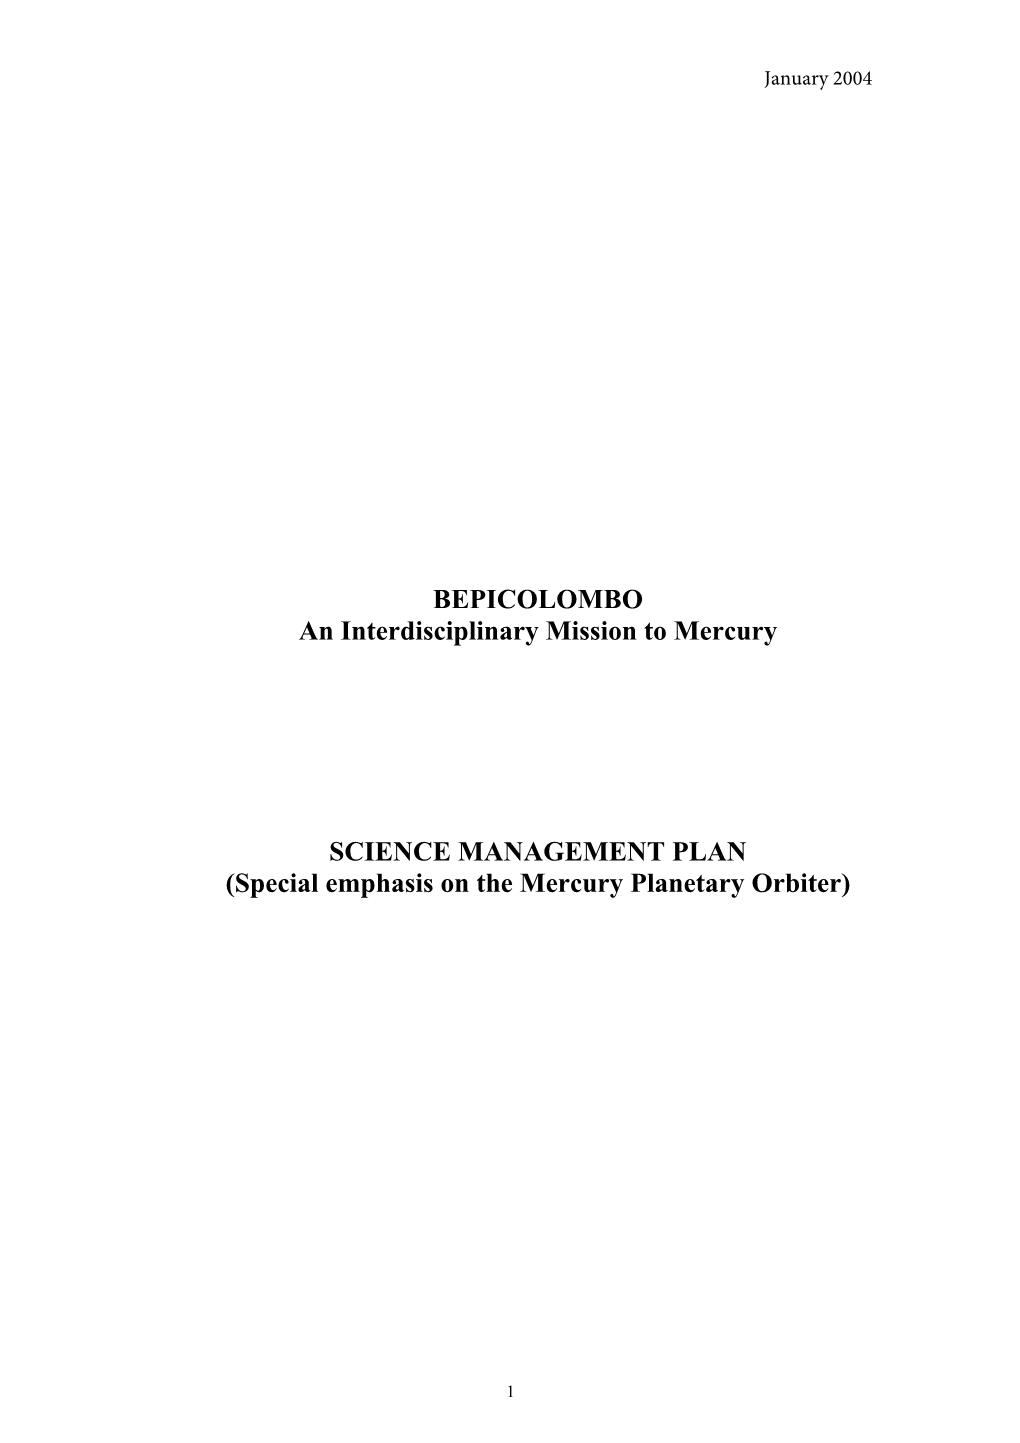 Bepicolombo MPO Science Management Plan